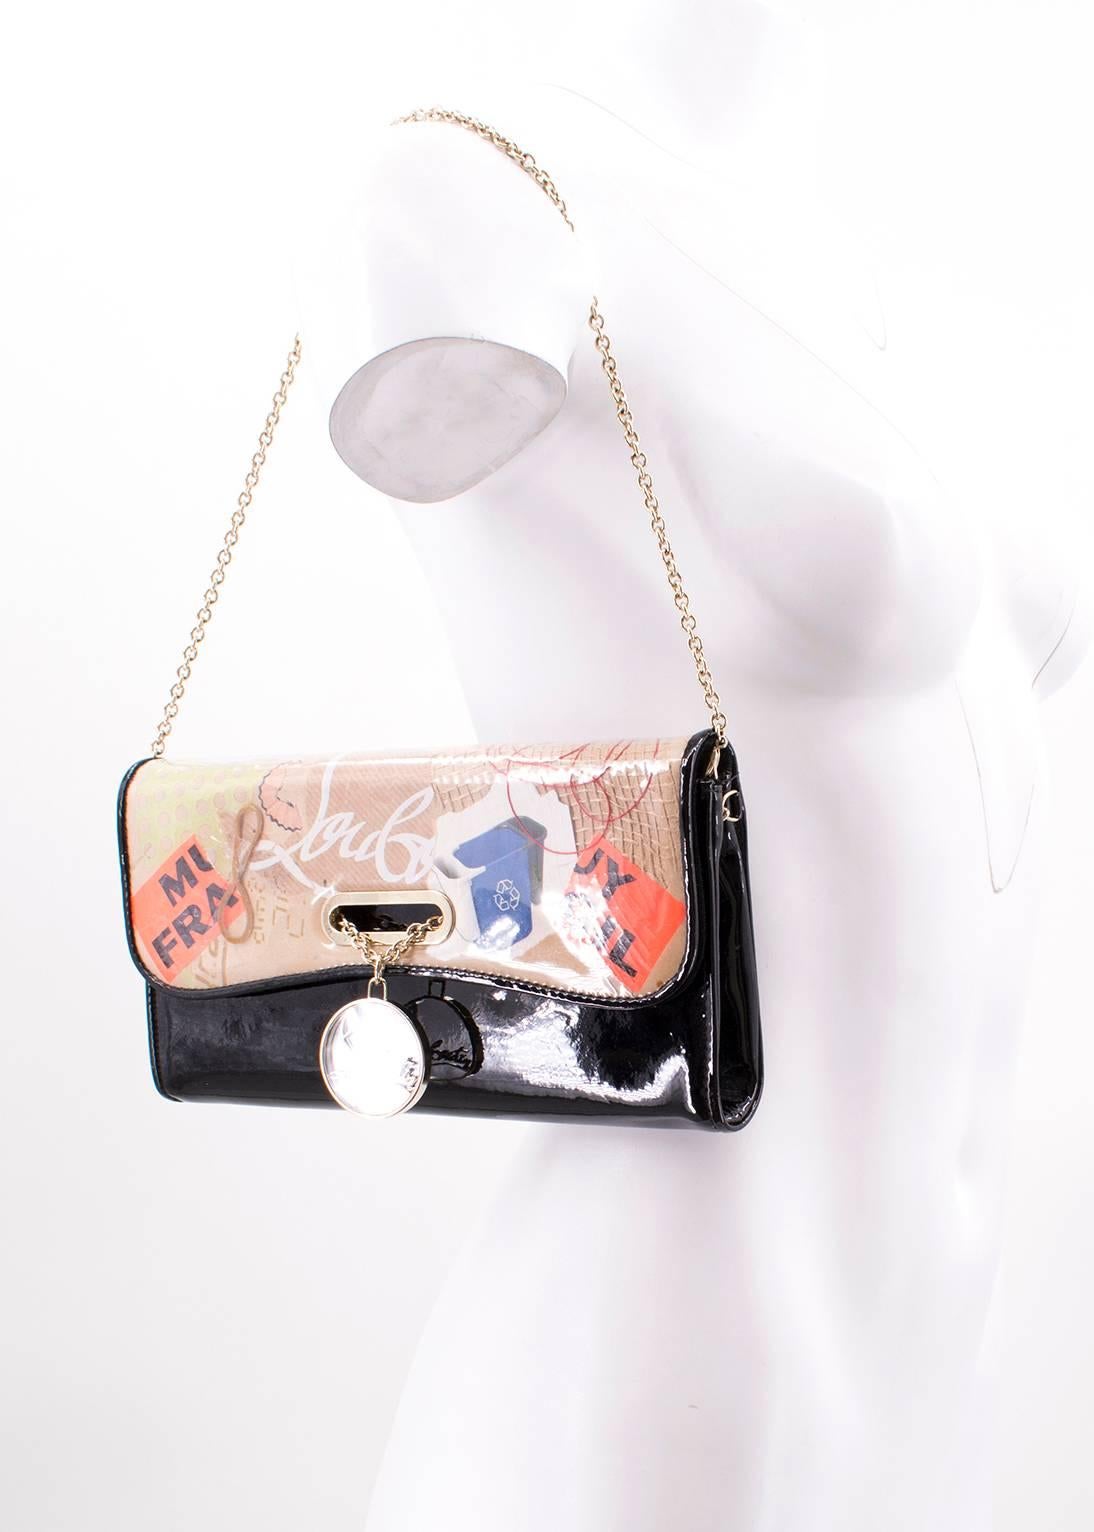  Christian Louboutin Trash Patent Leather Bag For Sale 3